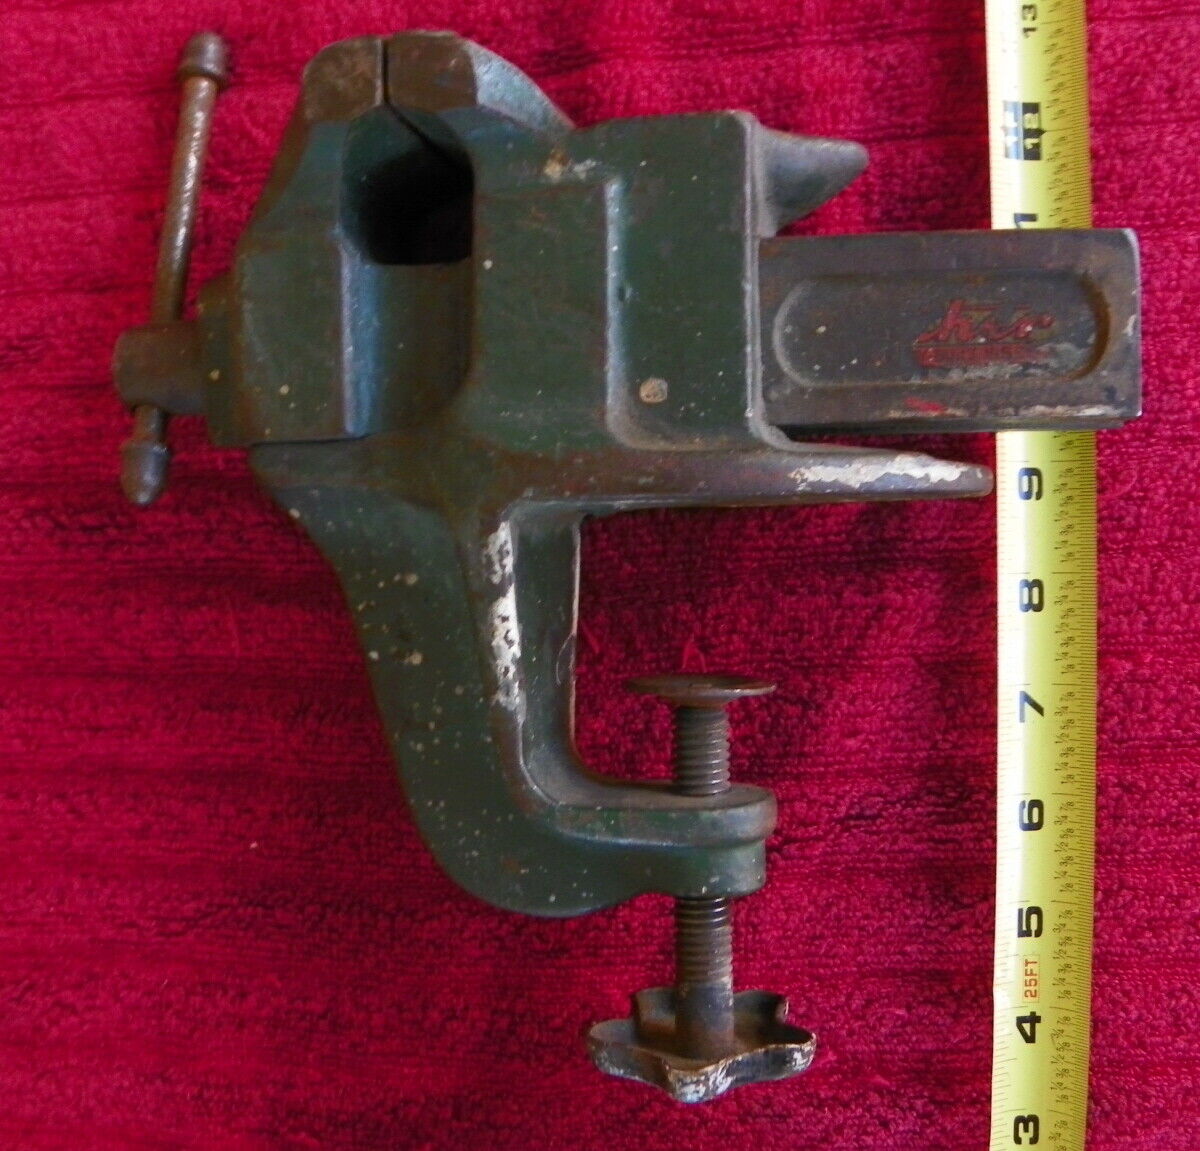 Vintage Luther Warren Bench Vise Clamp On 2 1/2in 2nd SMALL VISE ALSO 2 1/2in